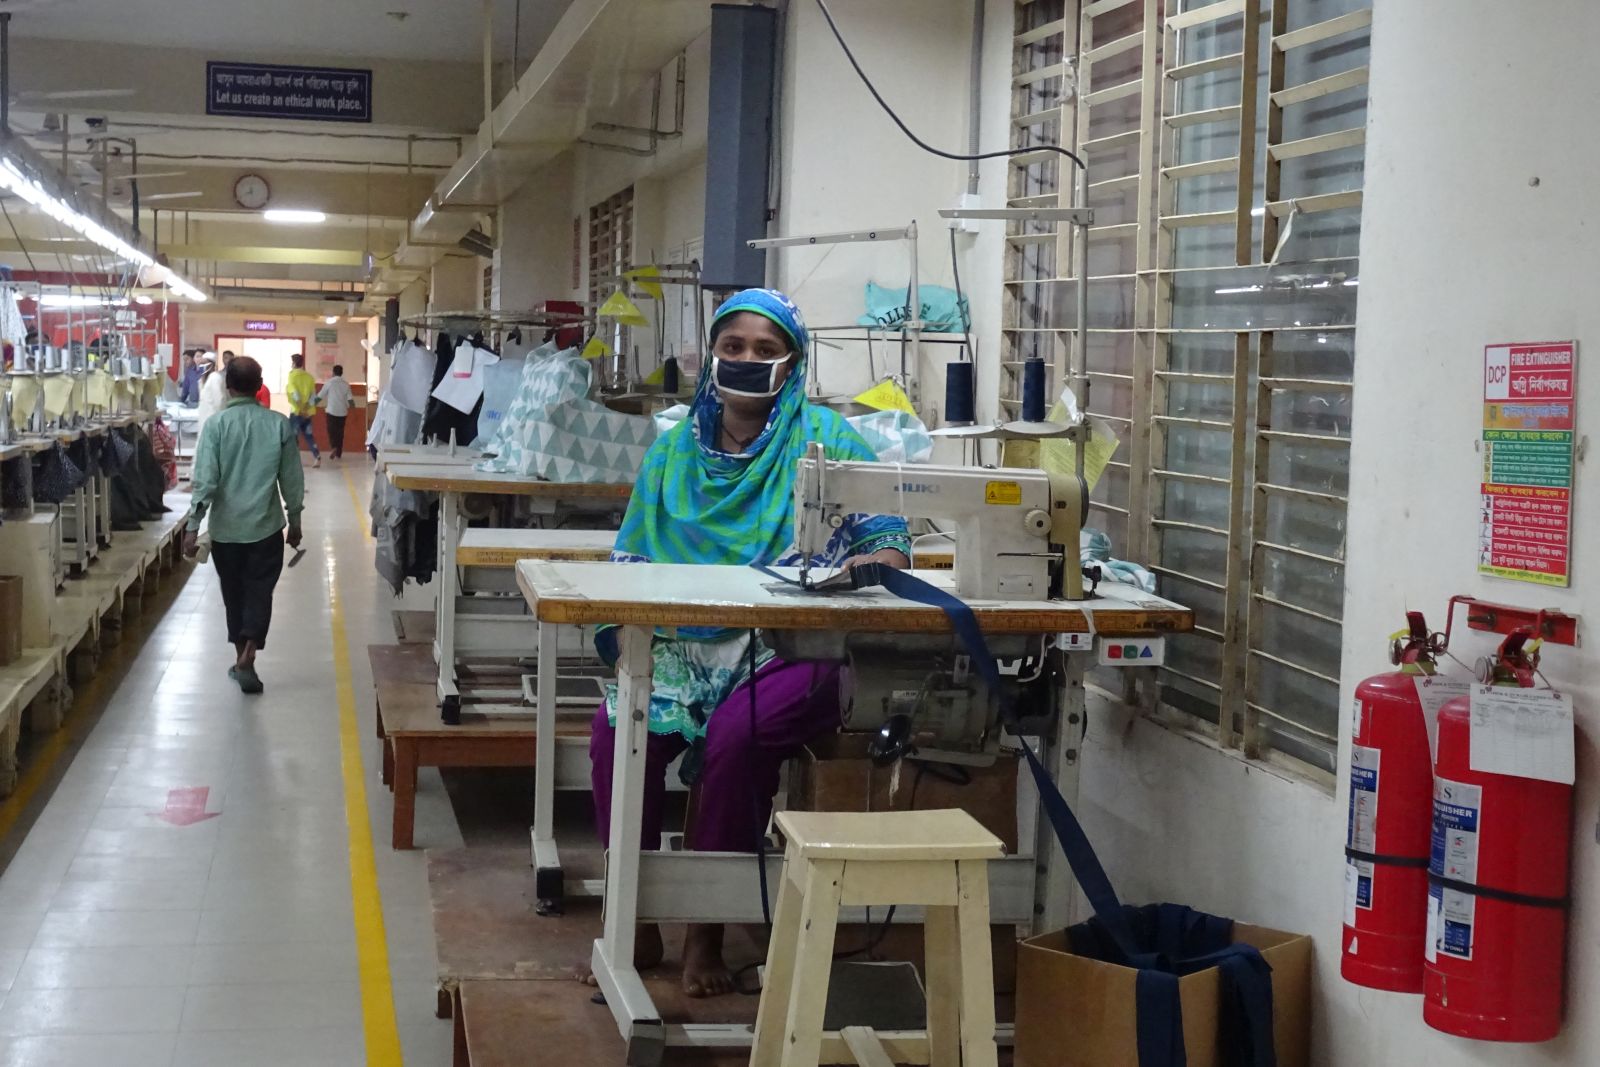 Inequality results from the current economic order, warns Oxfam: worker in Bangladeshi garment factory.